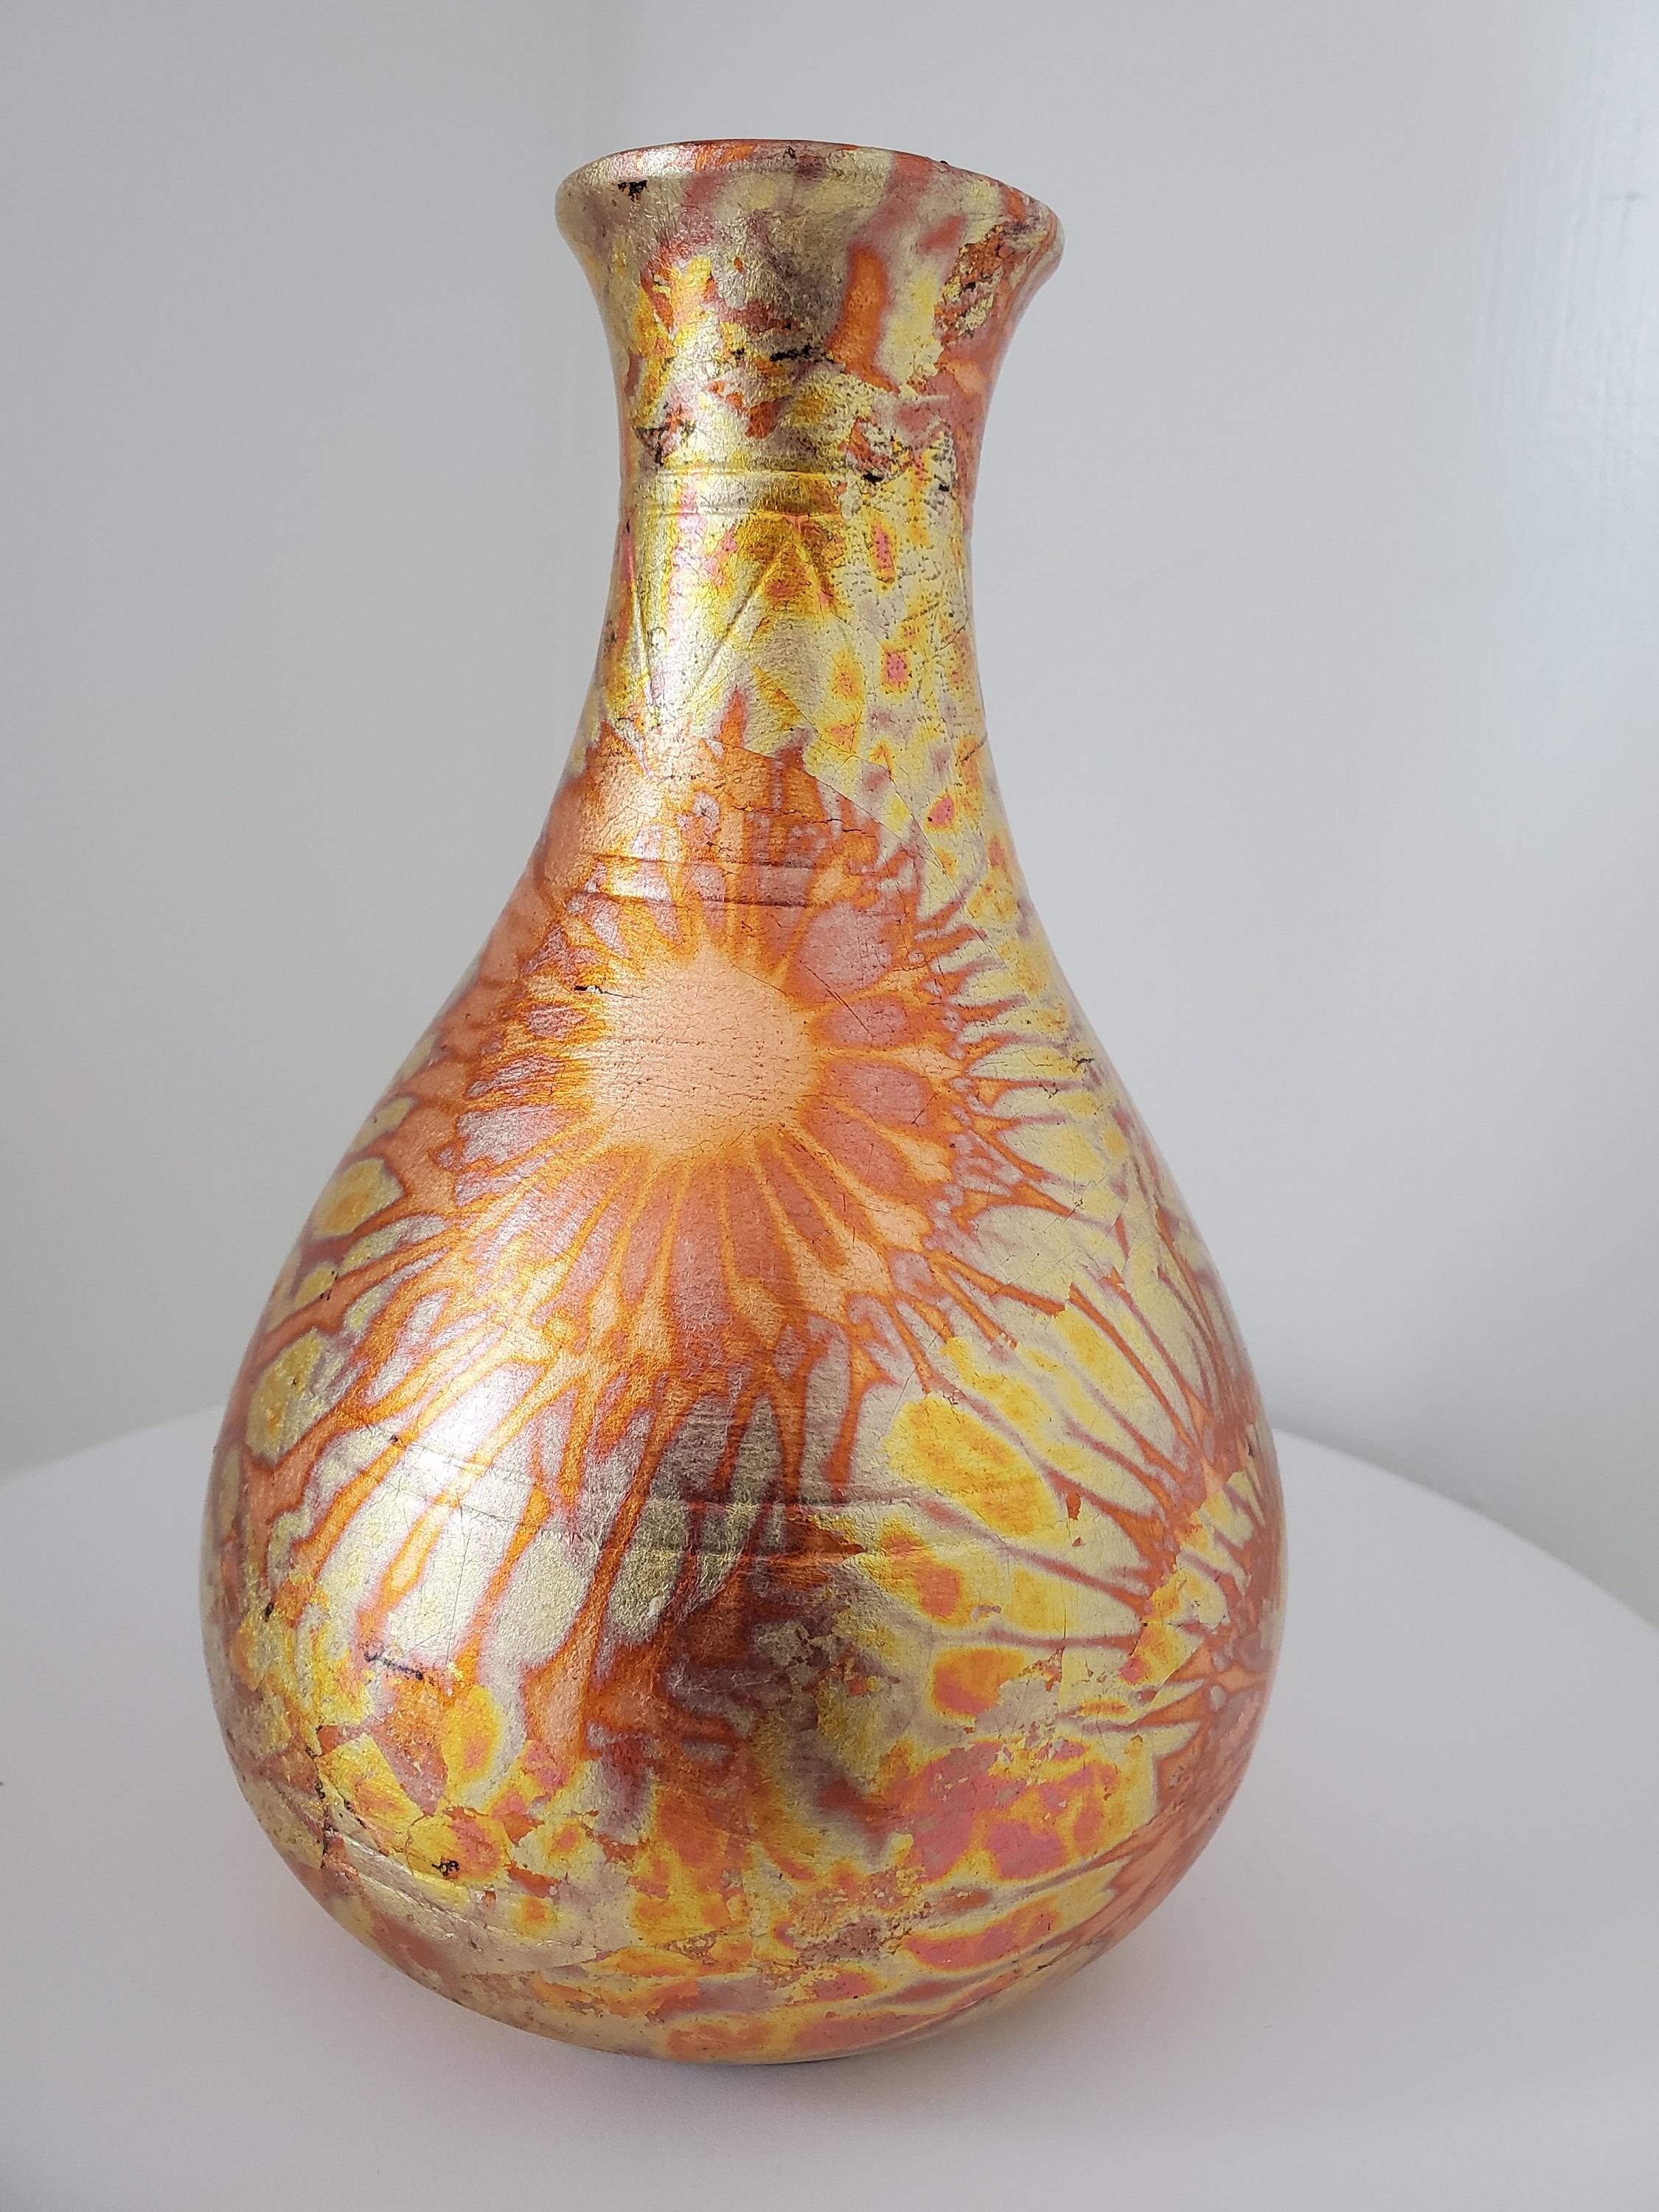 This raku pottery vase from NW Raku Gallery is a stunning addition to any traditional or modern décor, such as art deco, mid-century modern, or farmhouse style. This raku pottery vase was made by the Navajo People in the Northwest United States and